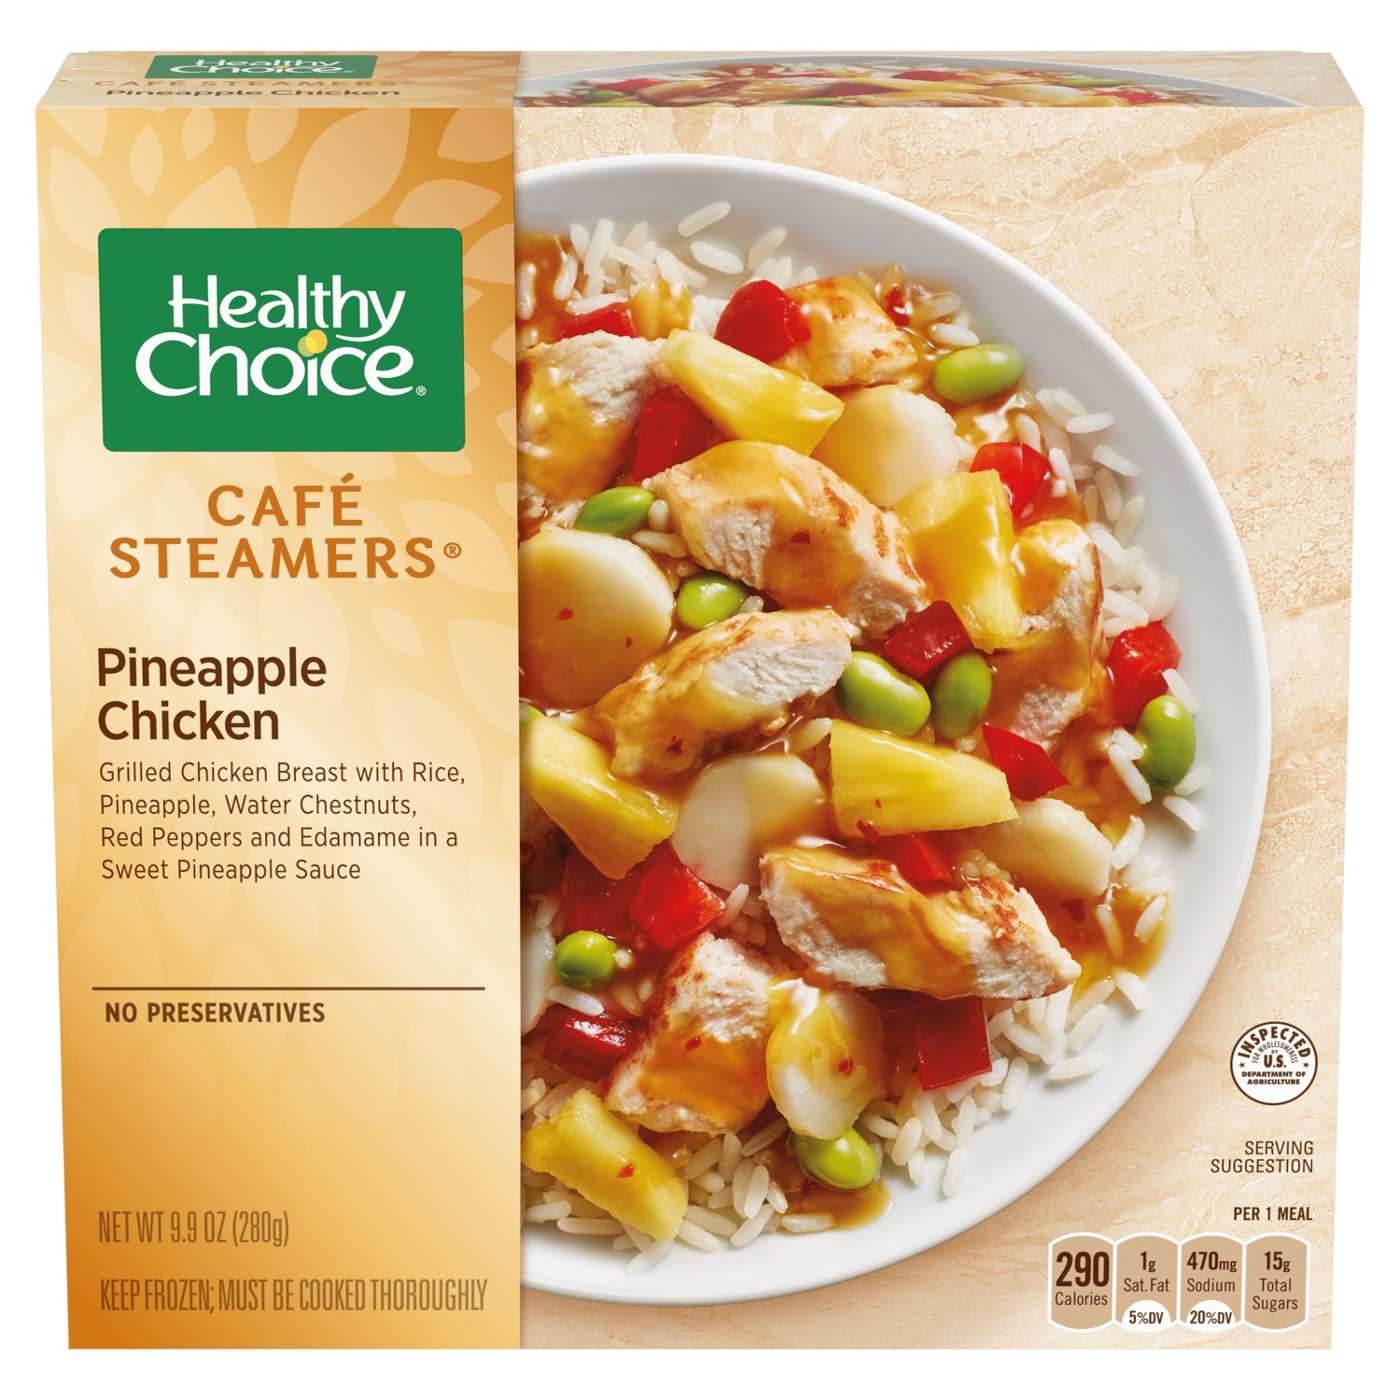 Healthy Choice Café Steamers Pineapple Chicken Frozen Meal; image 1 of 7